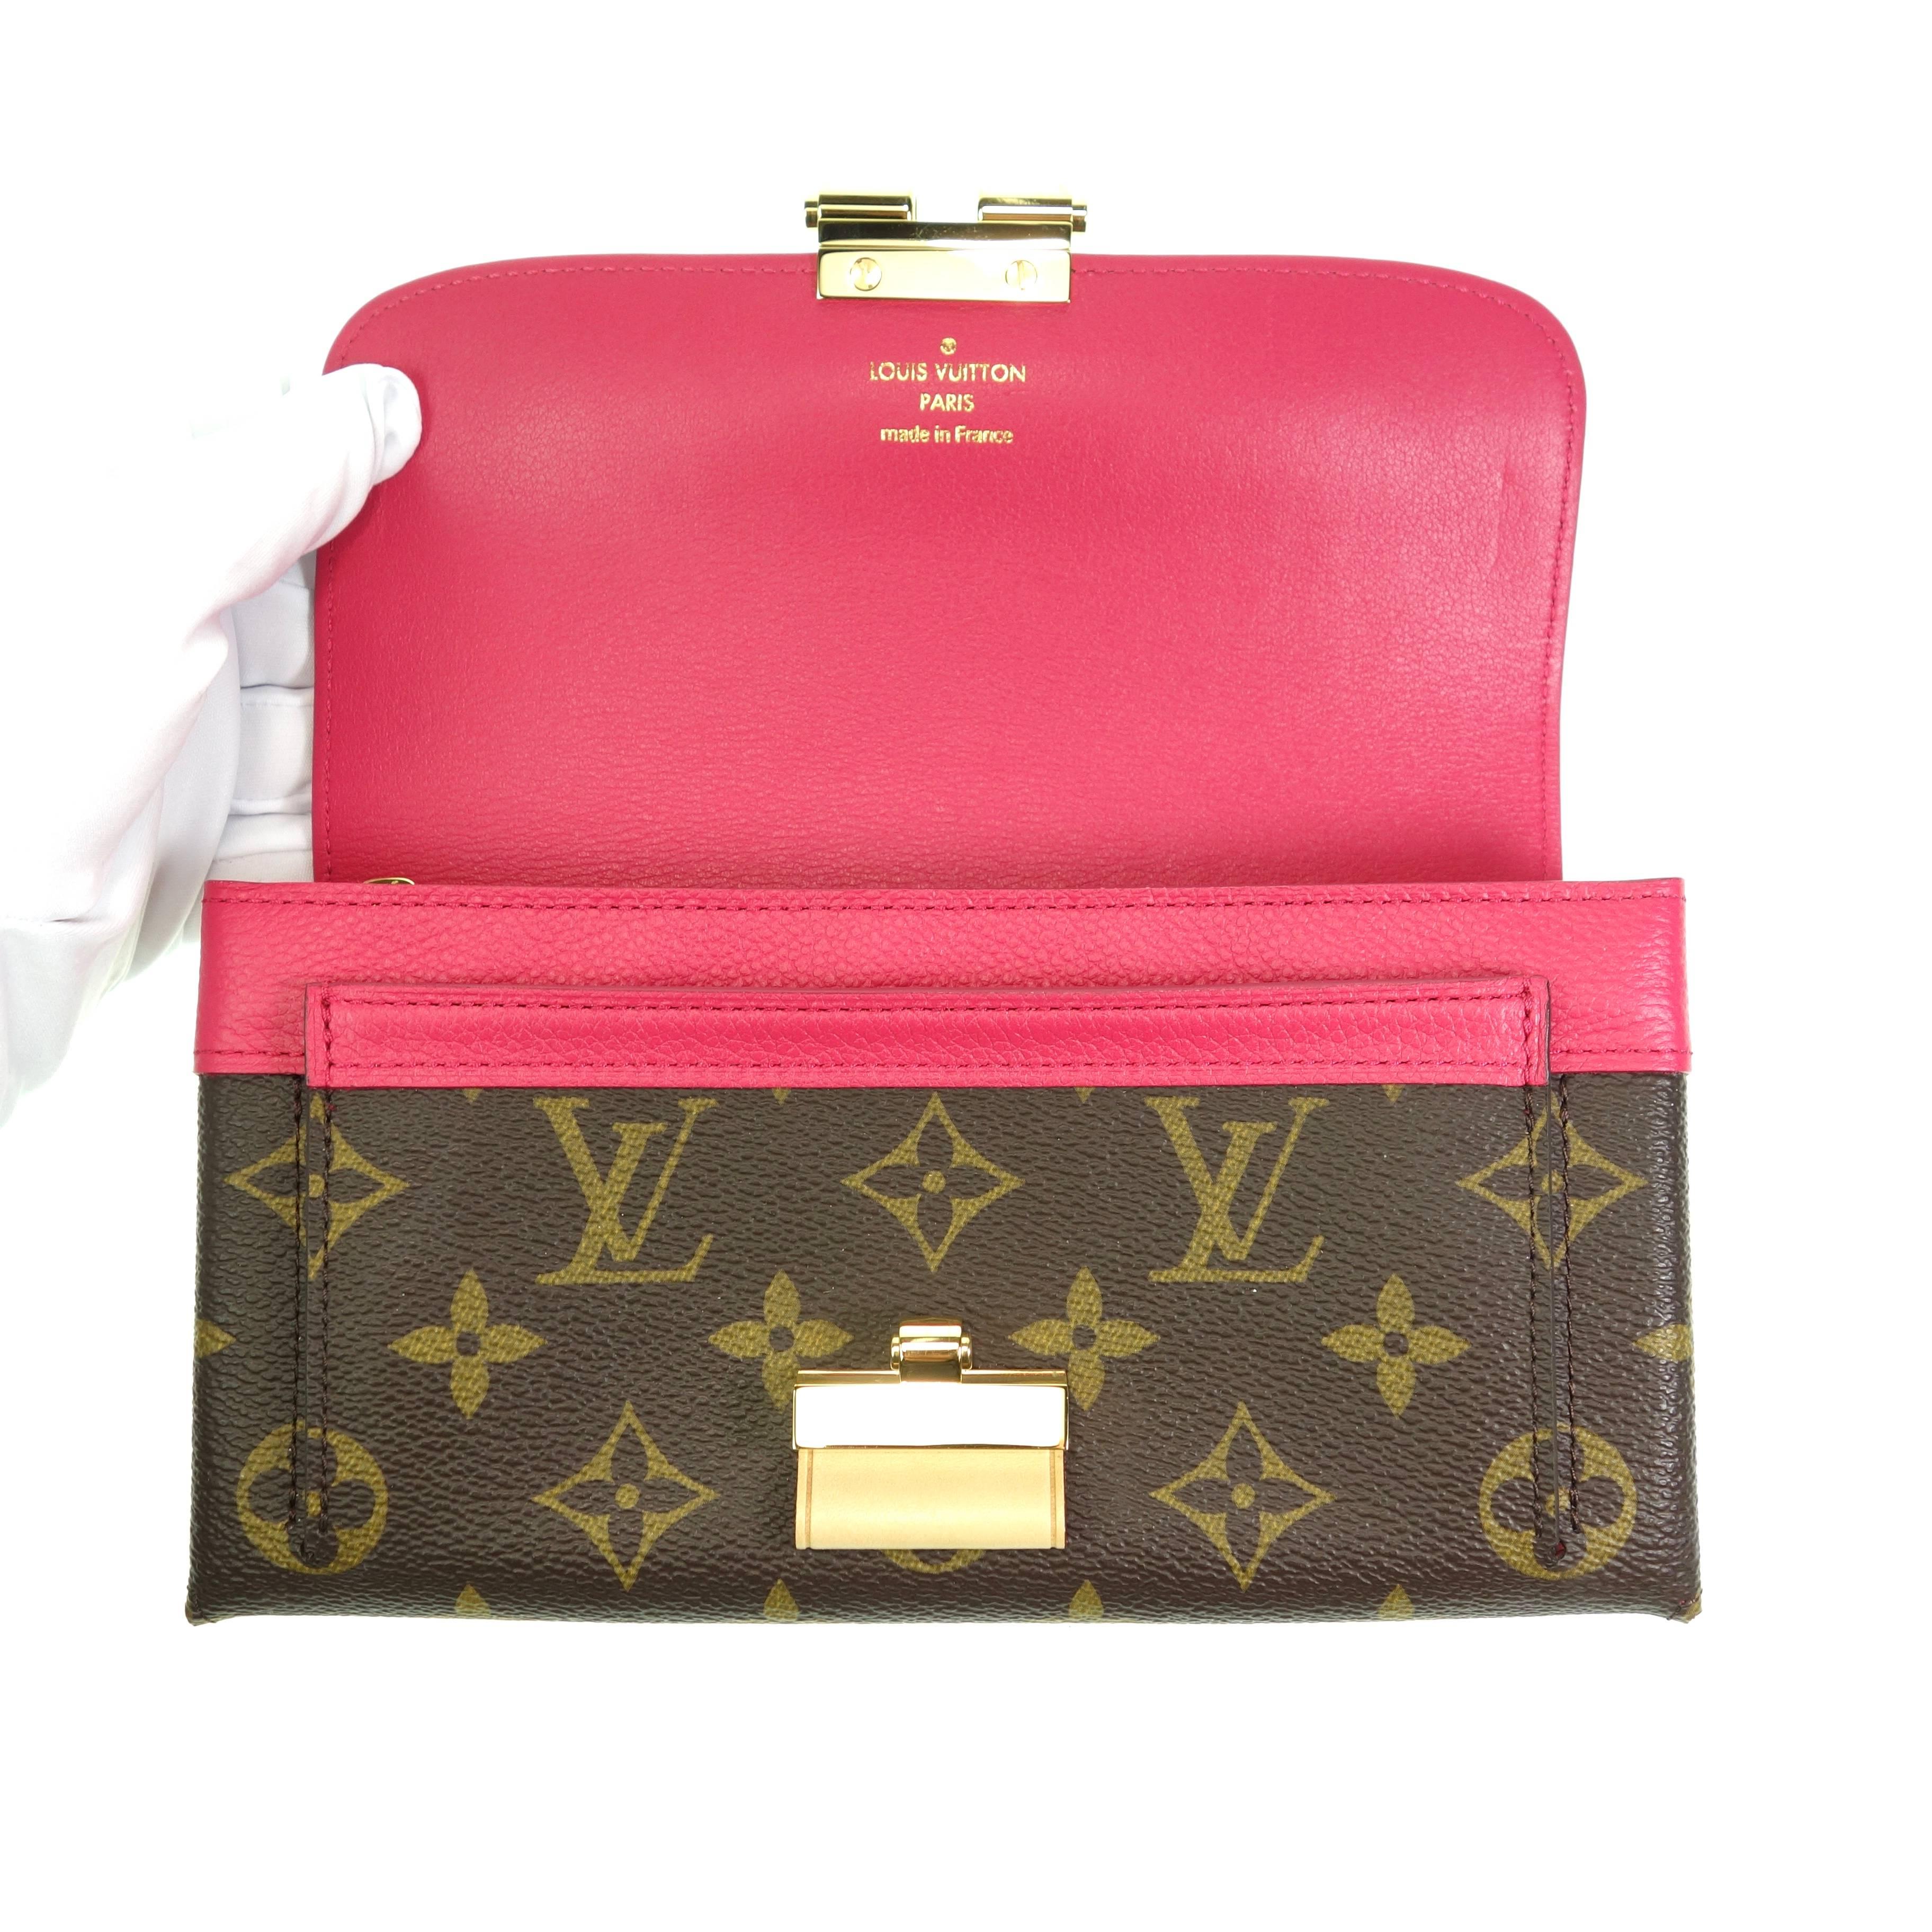 Louis Vuitton Elysee Pink Monogram Wallet Sold Out New In New Condition In Westlake Village, CA